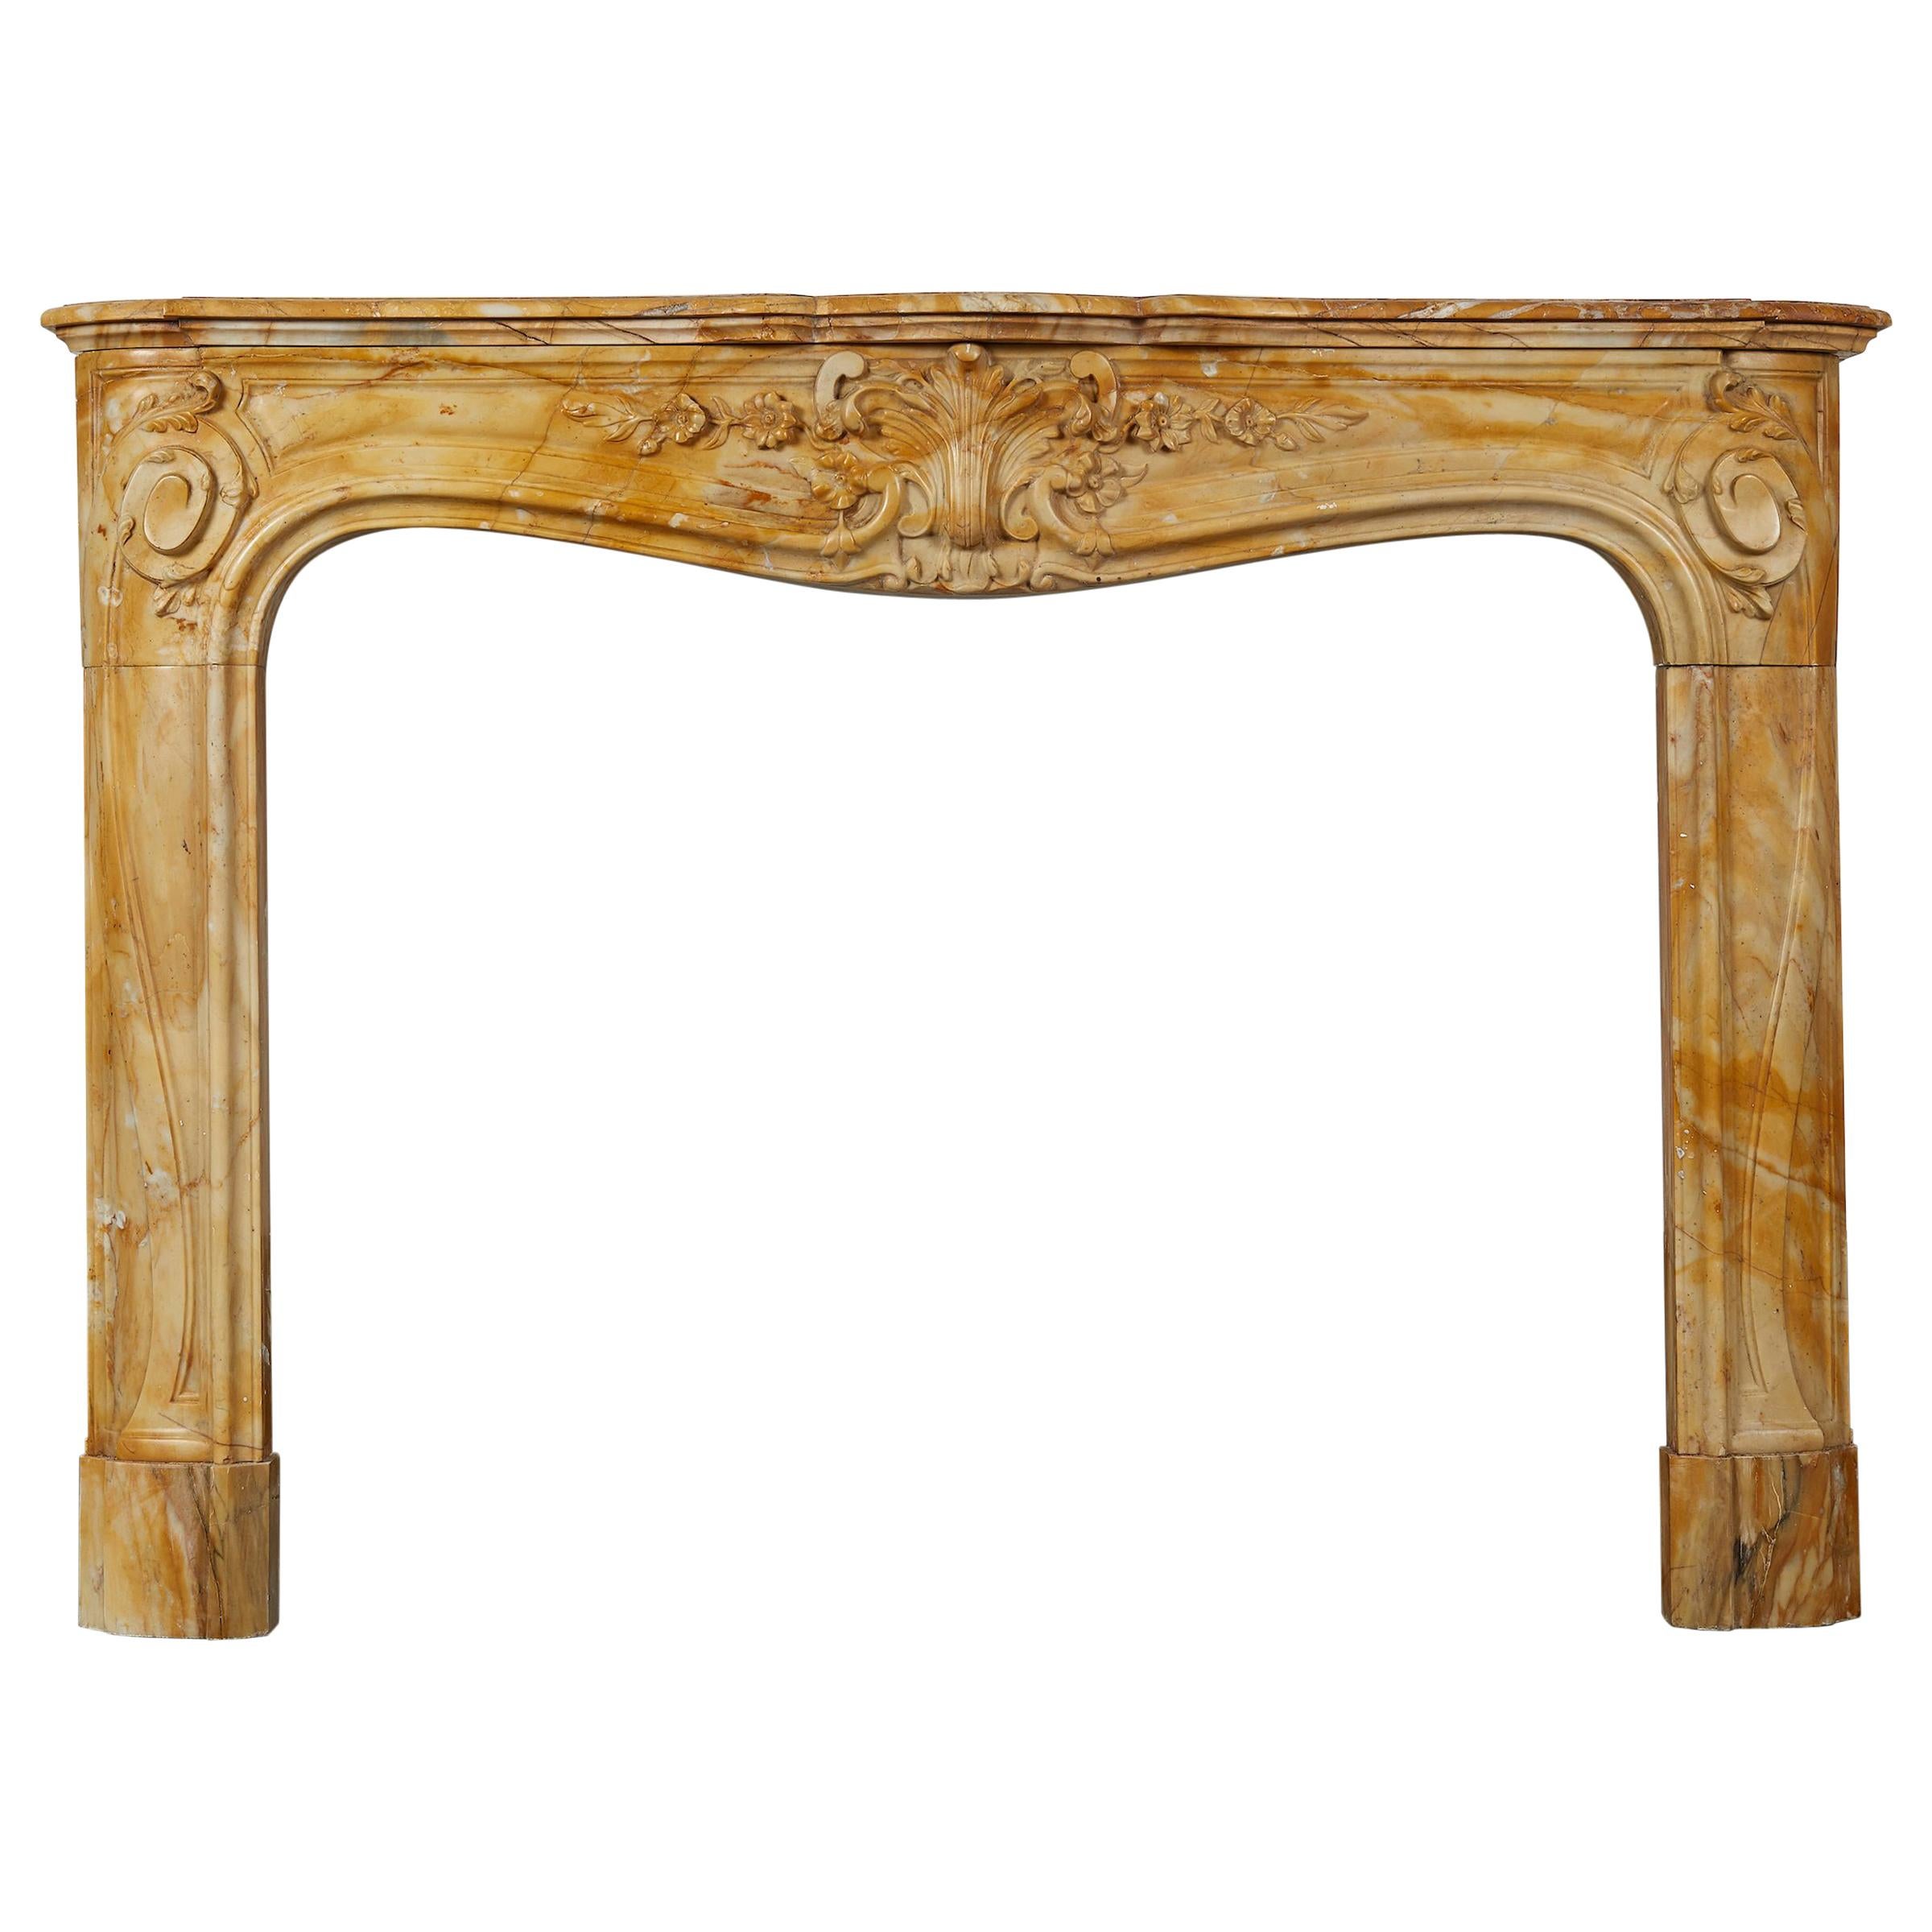 Regence Style Yellow Sienna Marble Mantel For Sale